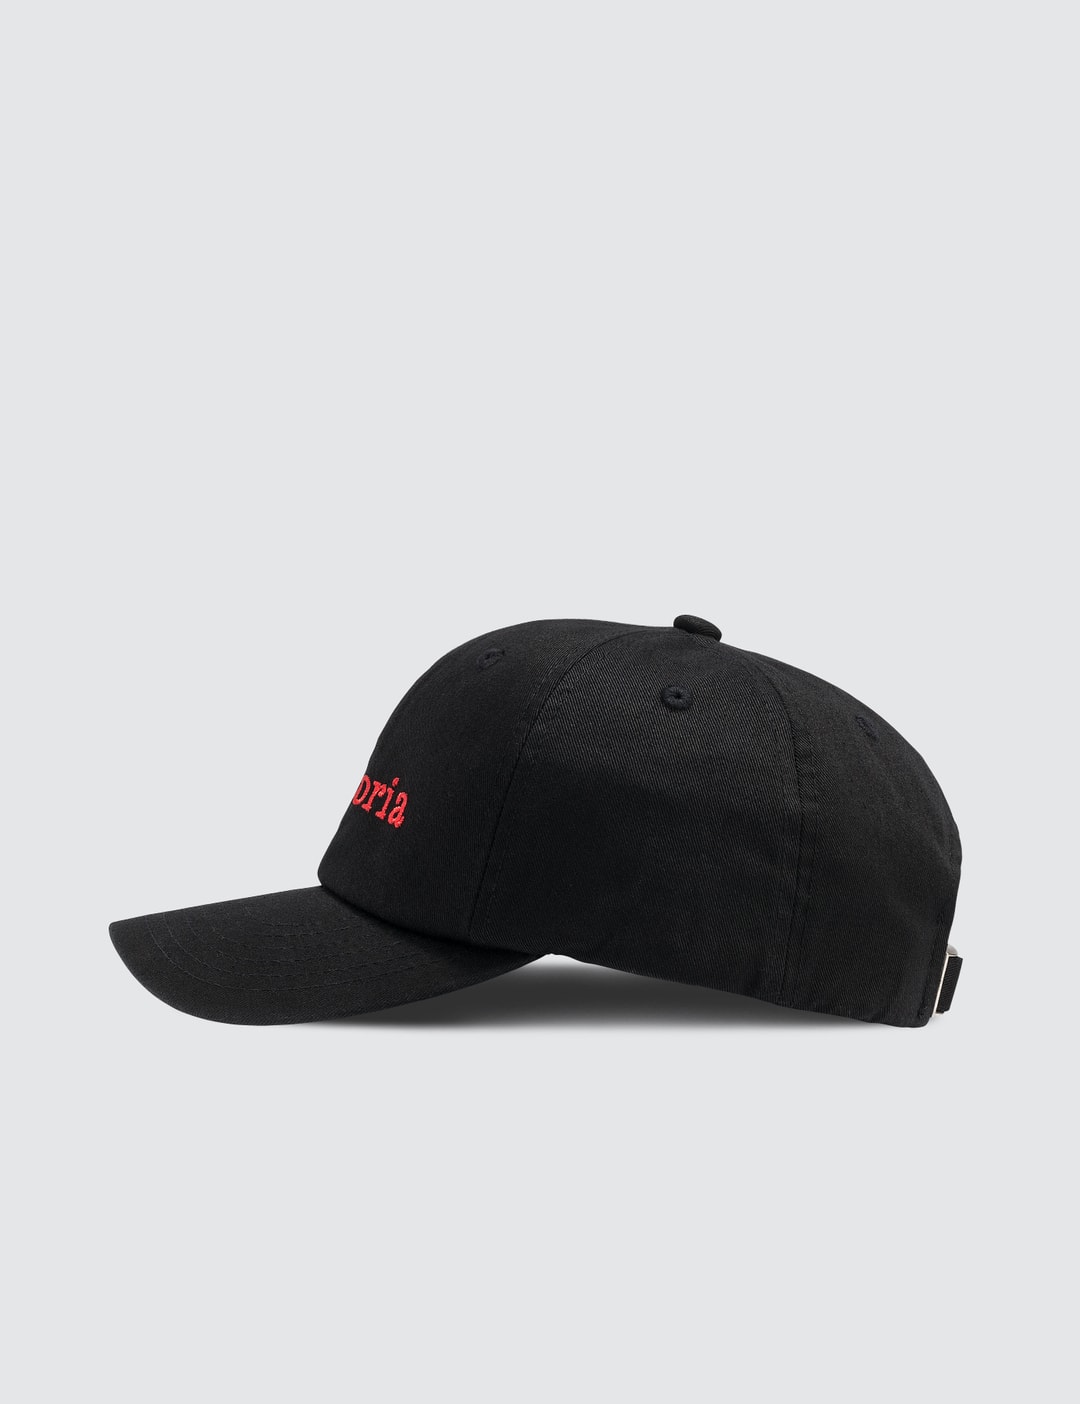 Misbhv - Euphoria Dad Cap | HBX - Globally Curated Fashion and ...